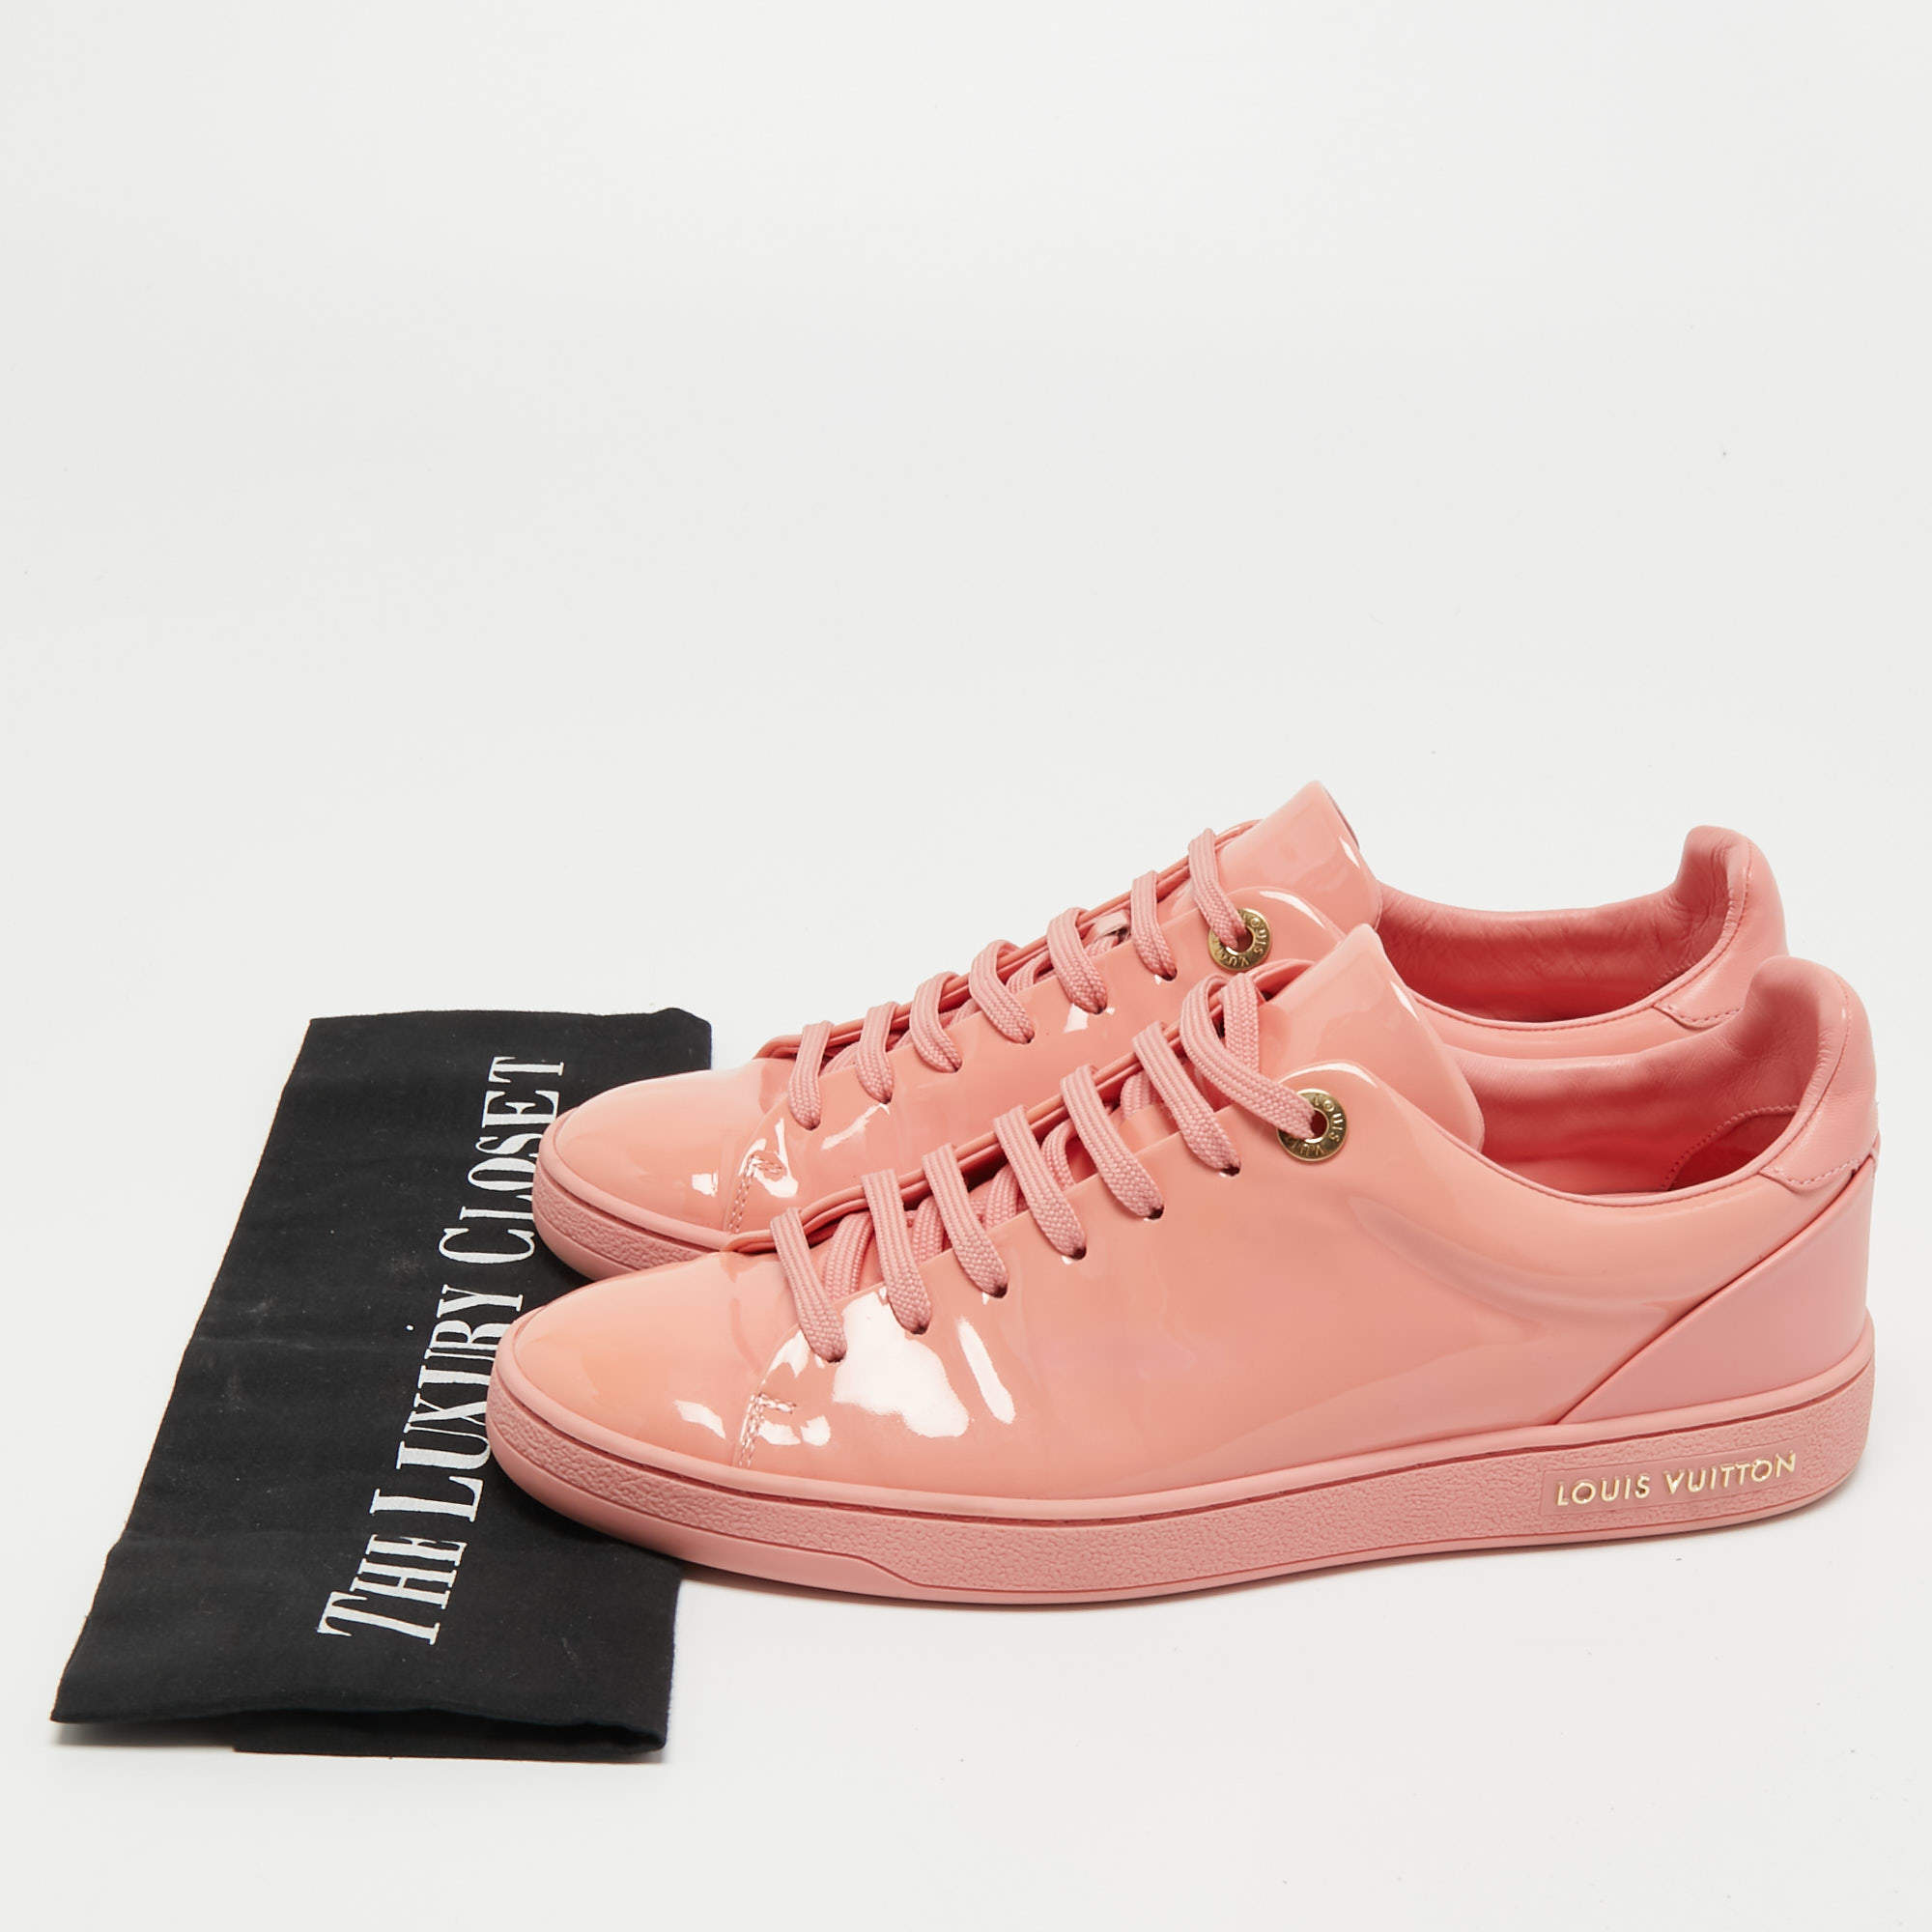 Louis Vuitton Hot Pink Patent and Leather Frontrow Sneakers Size 39 Louis  Vuitton